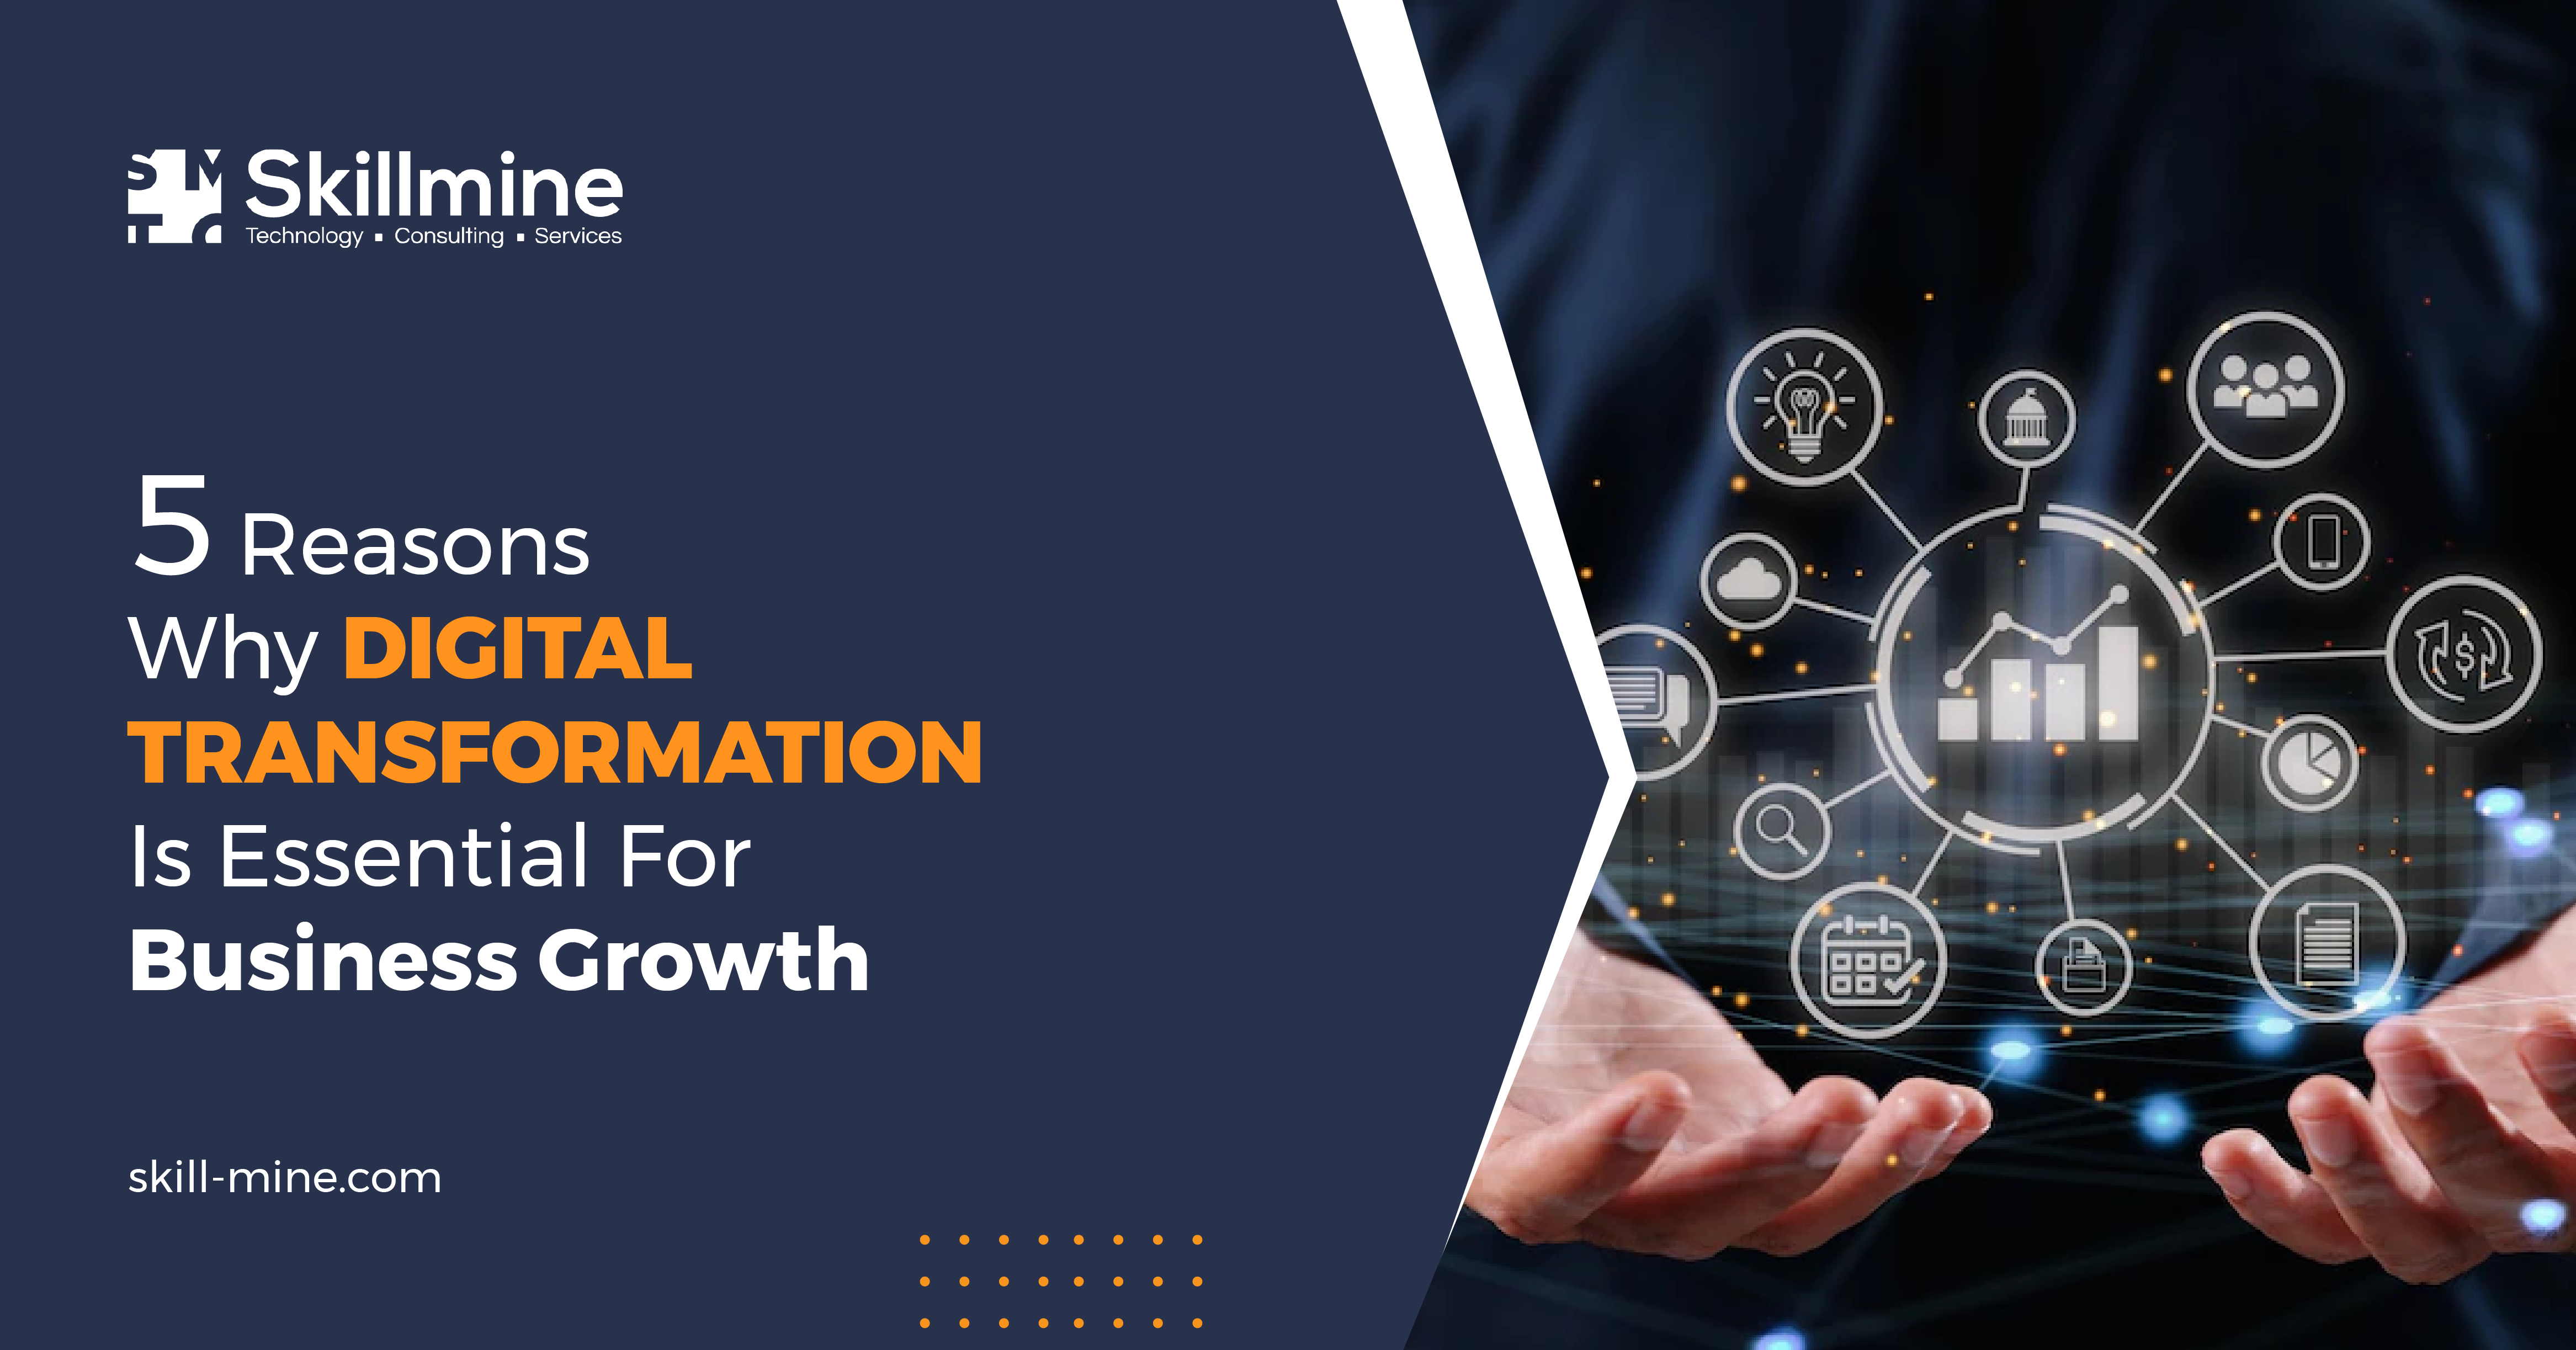 5 Reasons Why Digital Transformation Is Essential For Business Growth